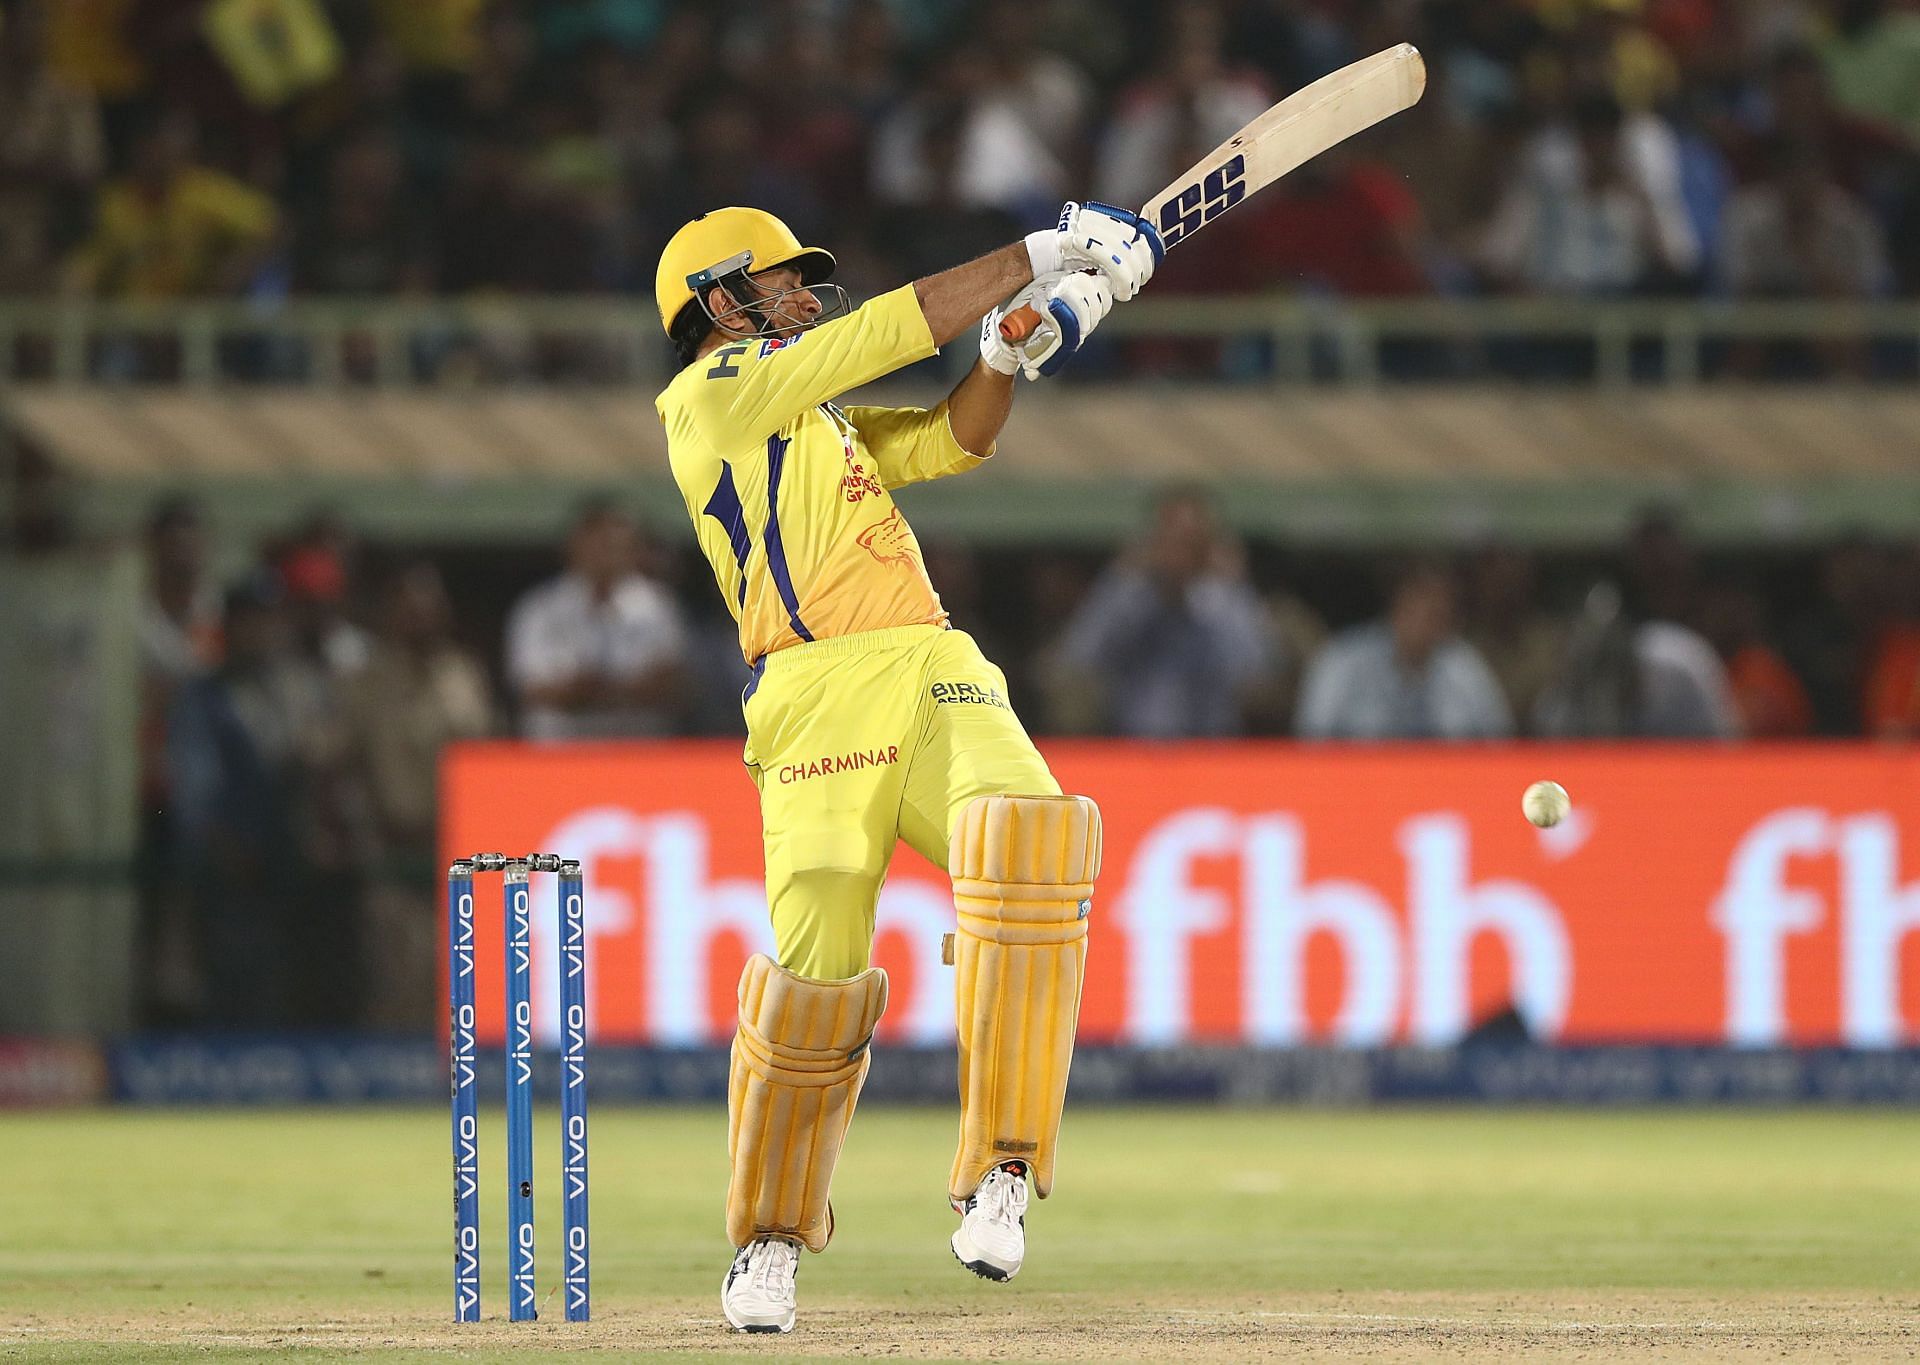 MS Dhoni in action during the 2019 edition. Pic: BCCI